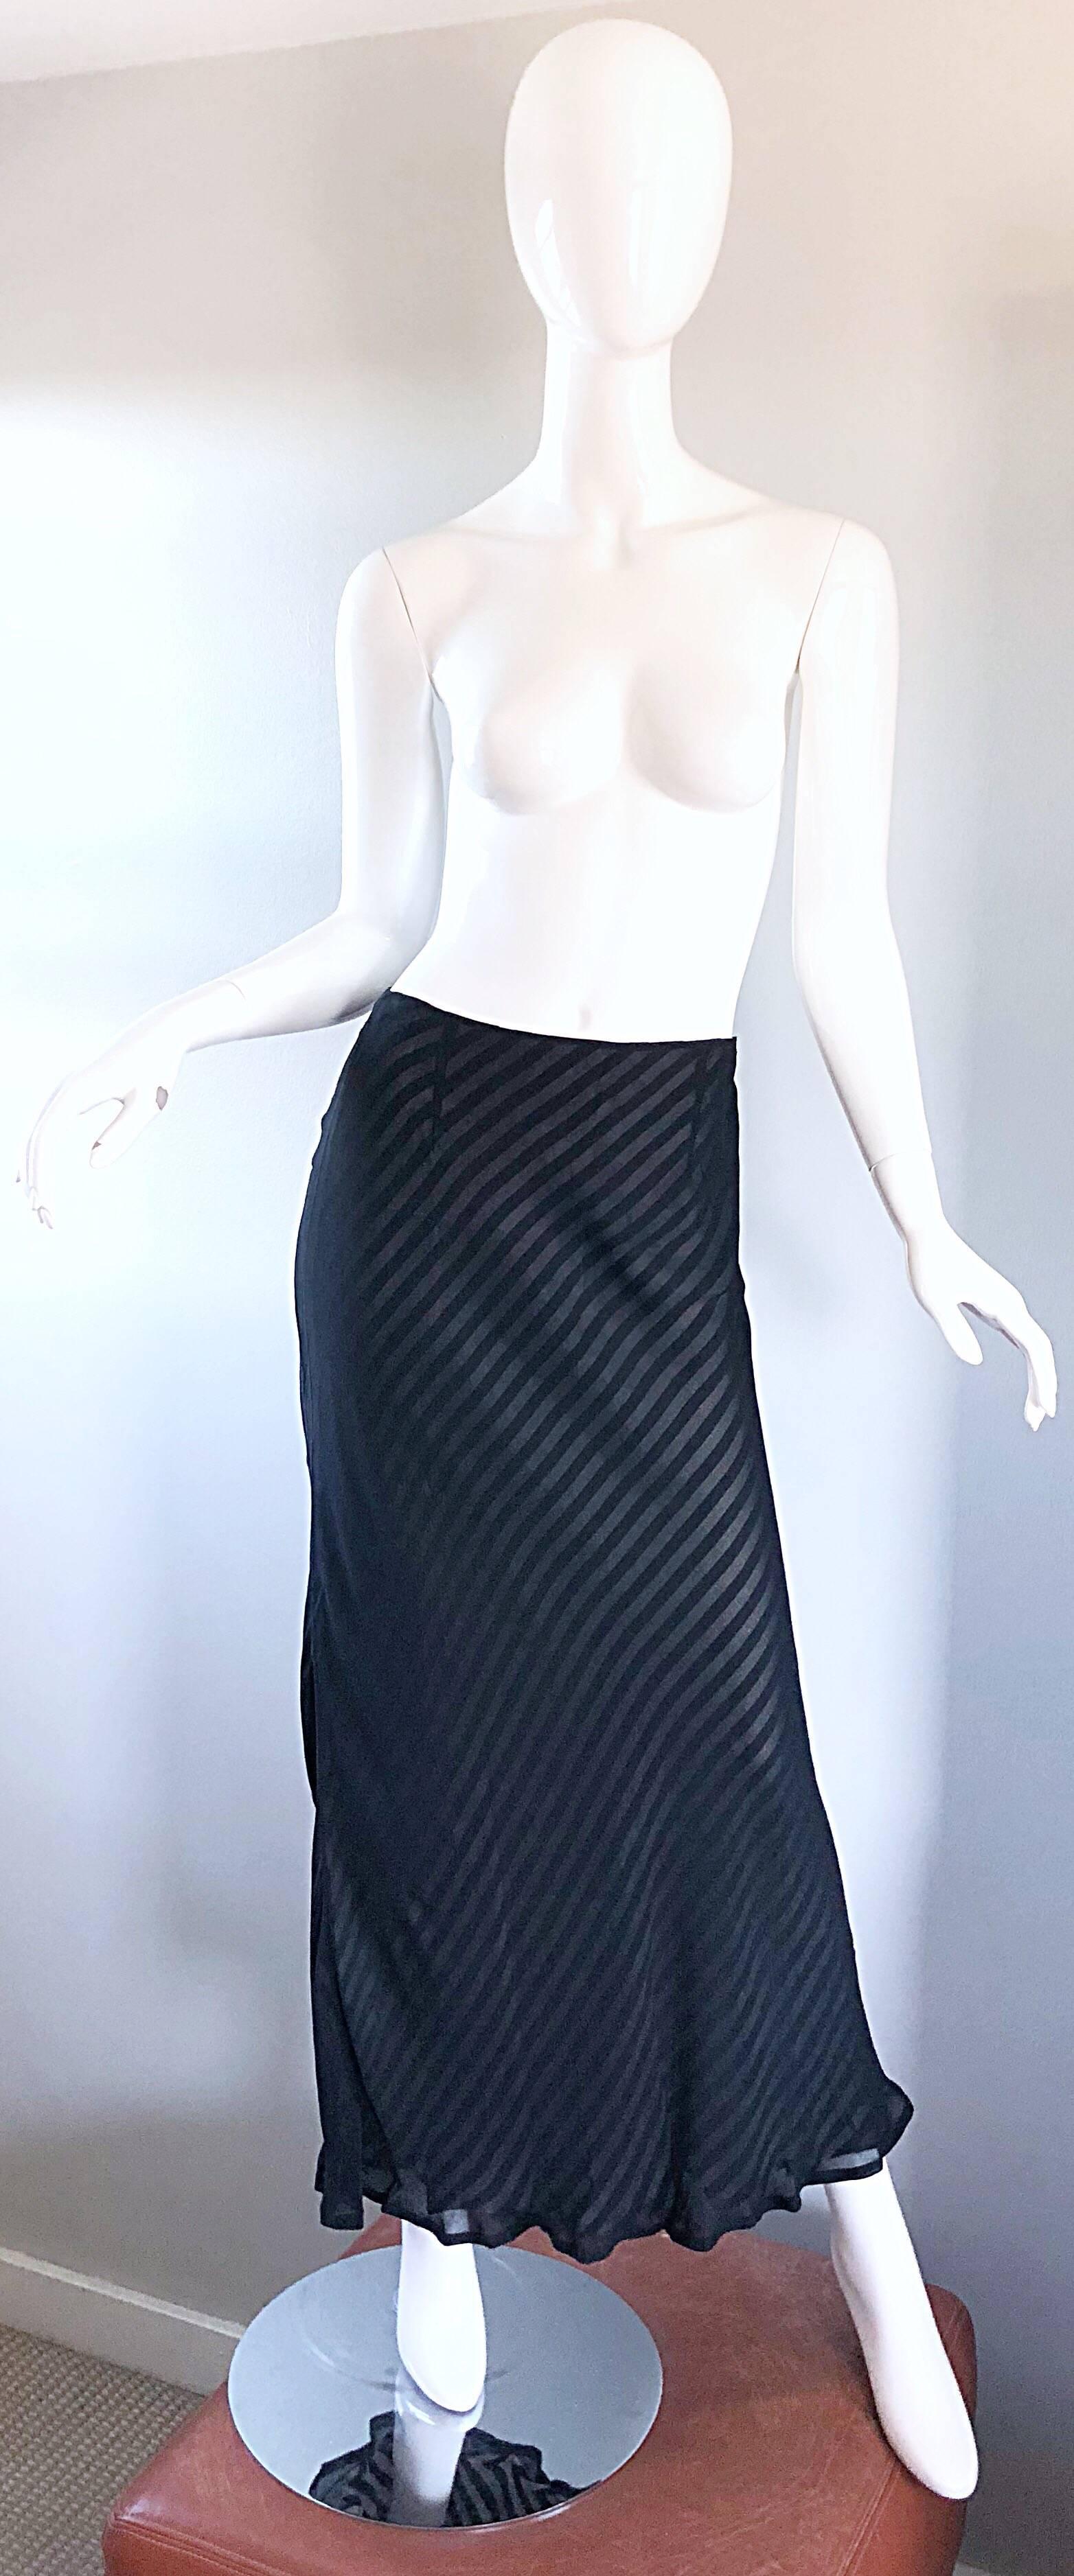 Exceptional 90s MOSCHINO CHEAP AND CHIC black and white striped maxi skirt! Features black and white diagonal striped rayon underskirt with a sheer black chiffon overlay. Hidden zipper up the side with hook-and-eye closure. Can easily be dressed up